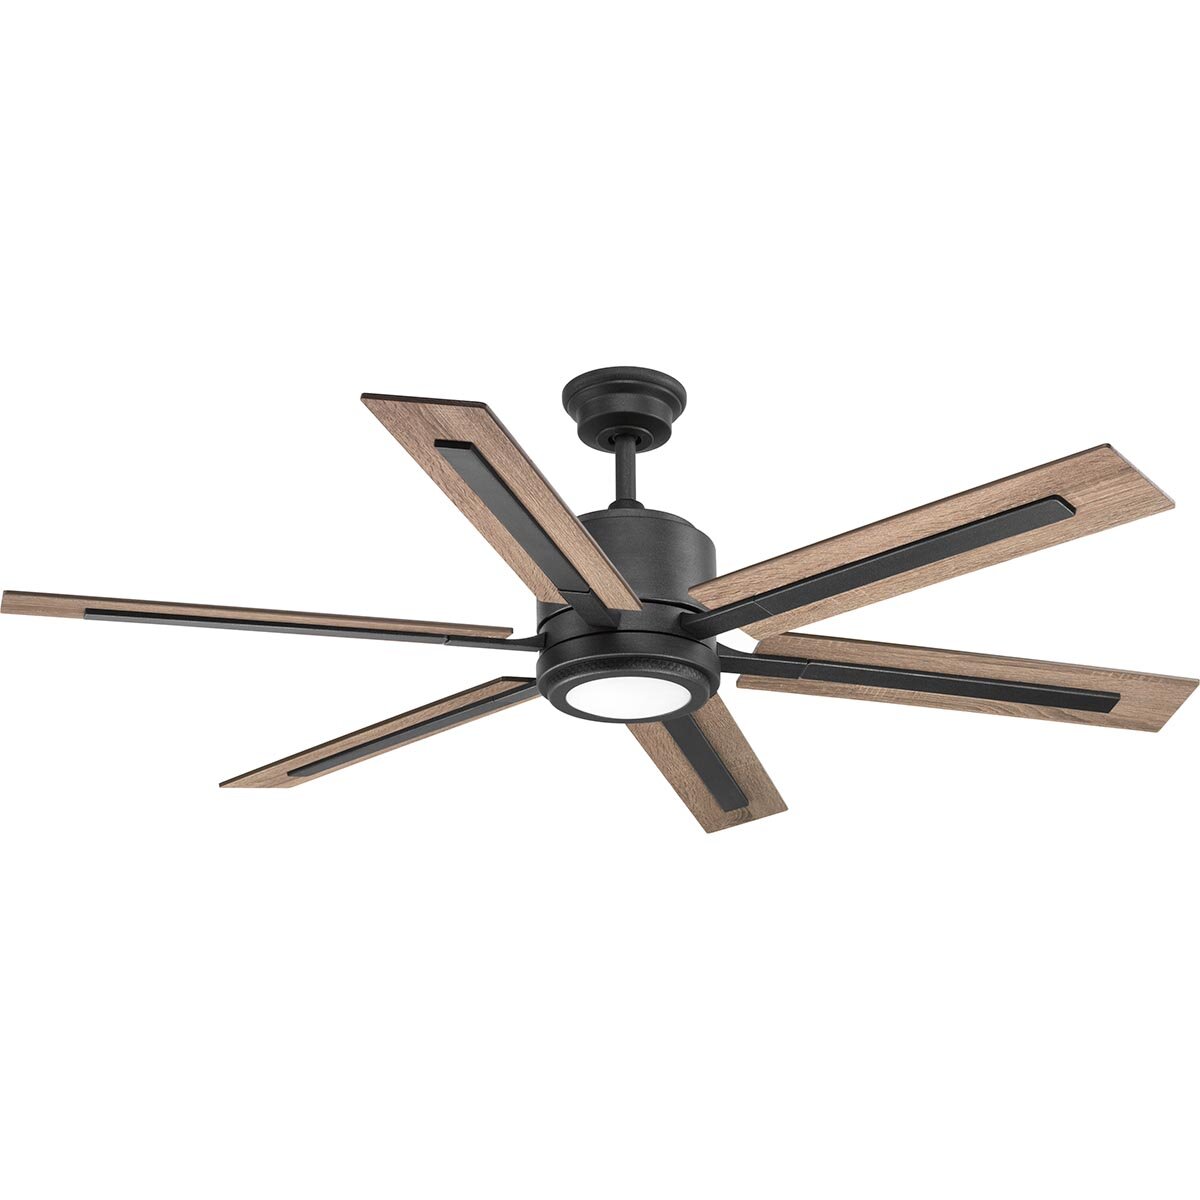 Union Rustic 60 Lesure 6 Blade Led Ceiling Fan With Remote Light